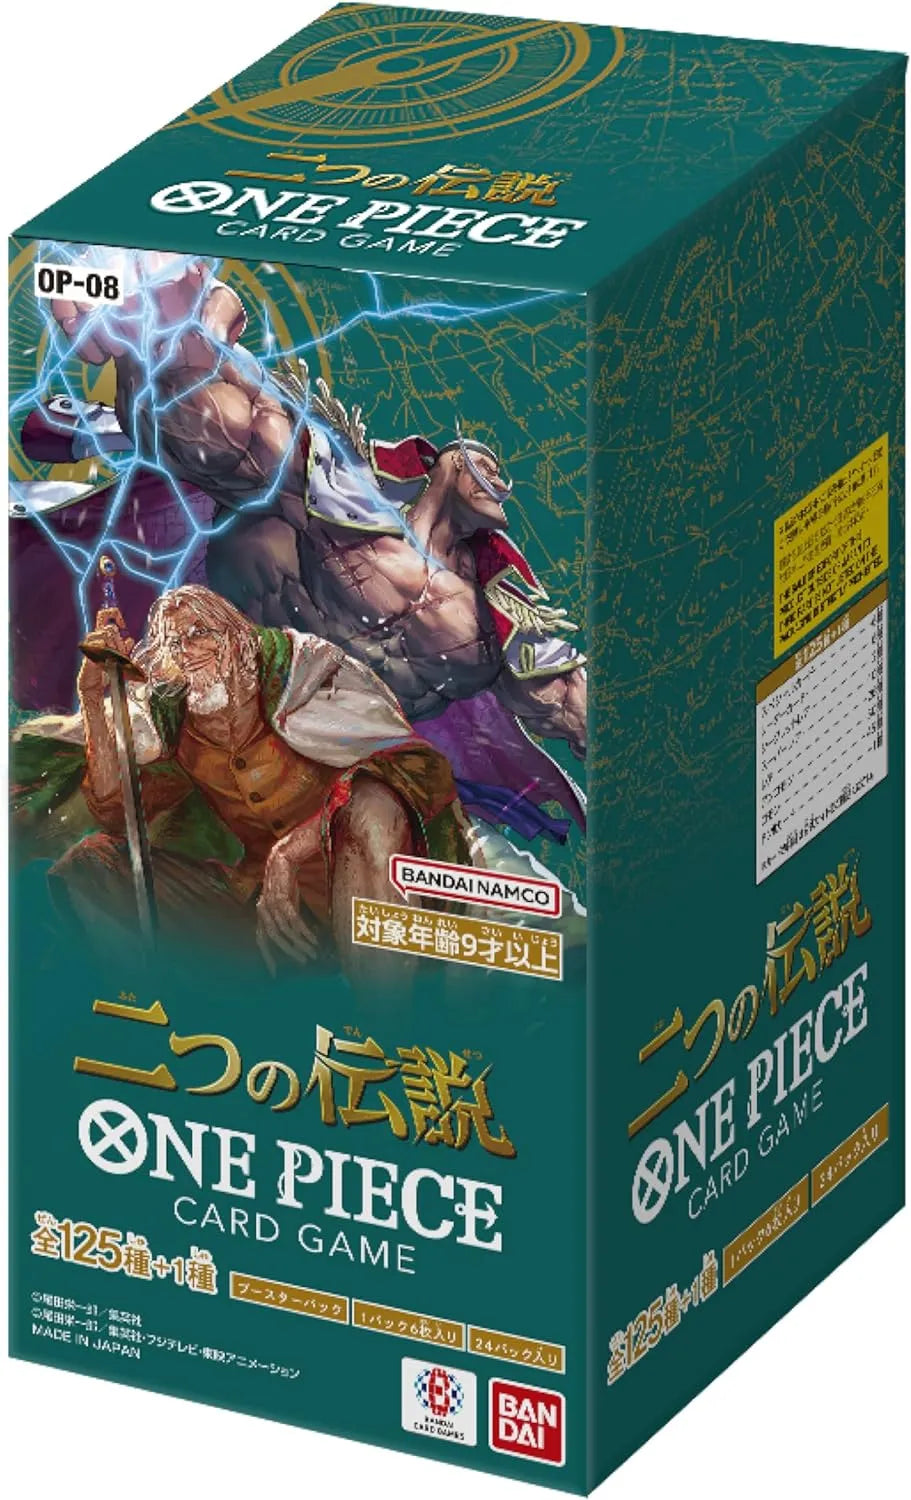 One Piece Card Game - Two Legends OP-08 Booster Box [Japanese] PRE-ORDER